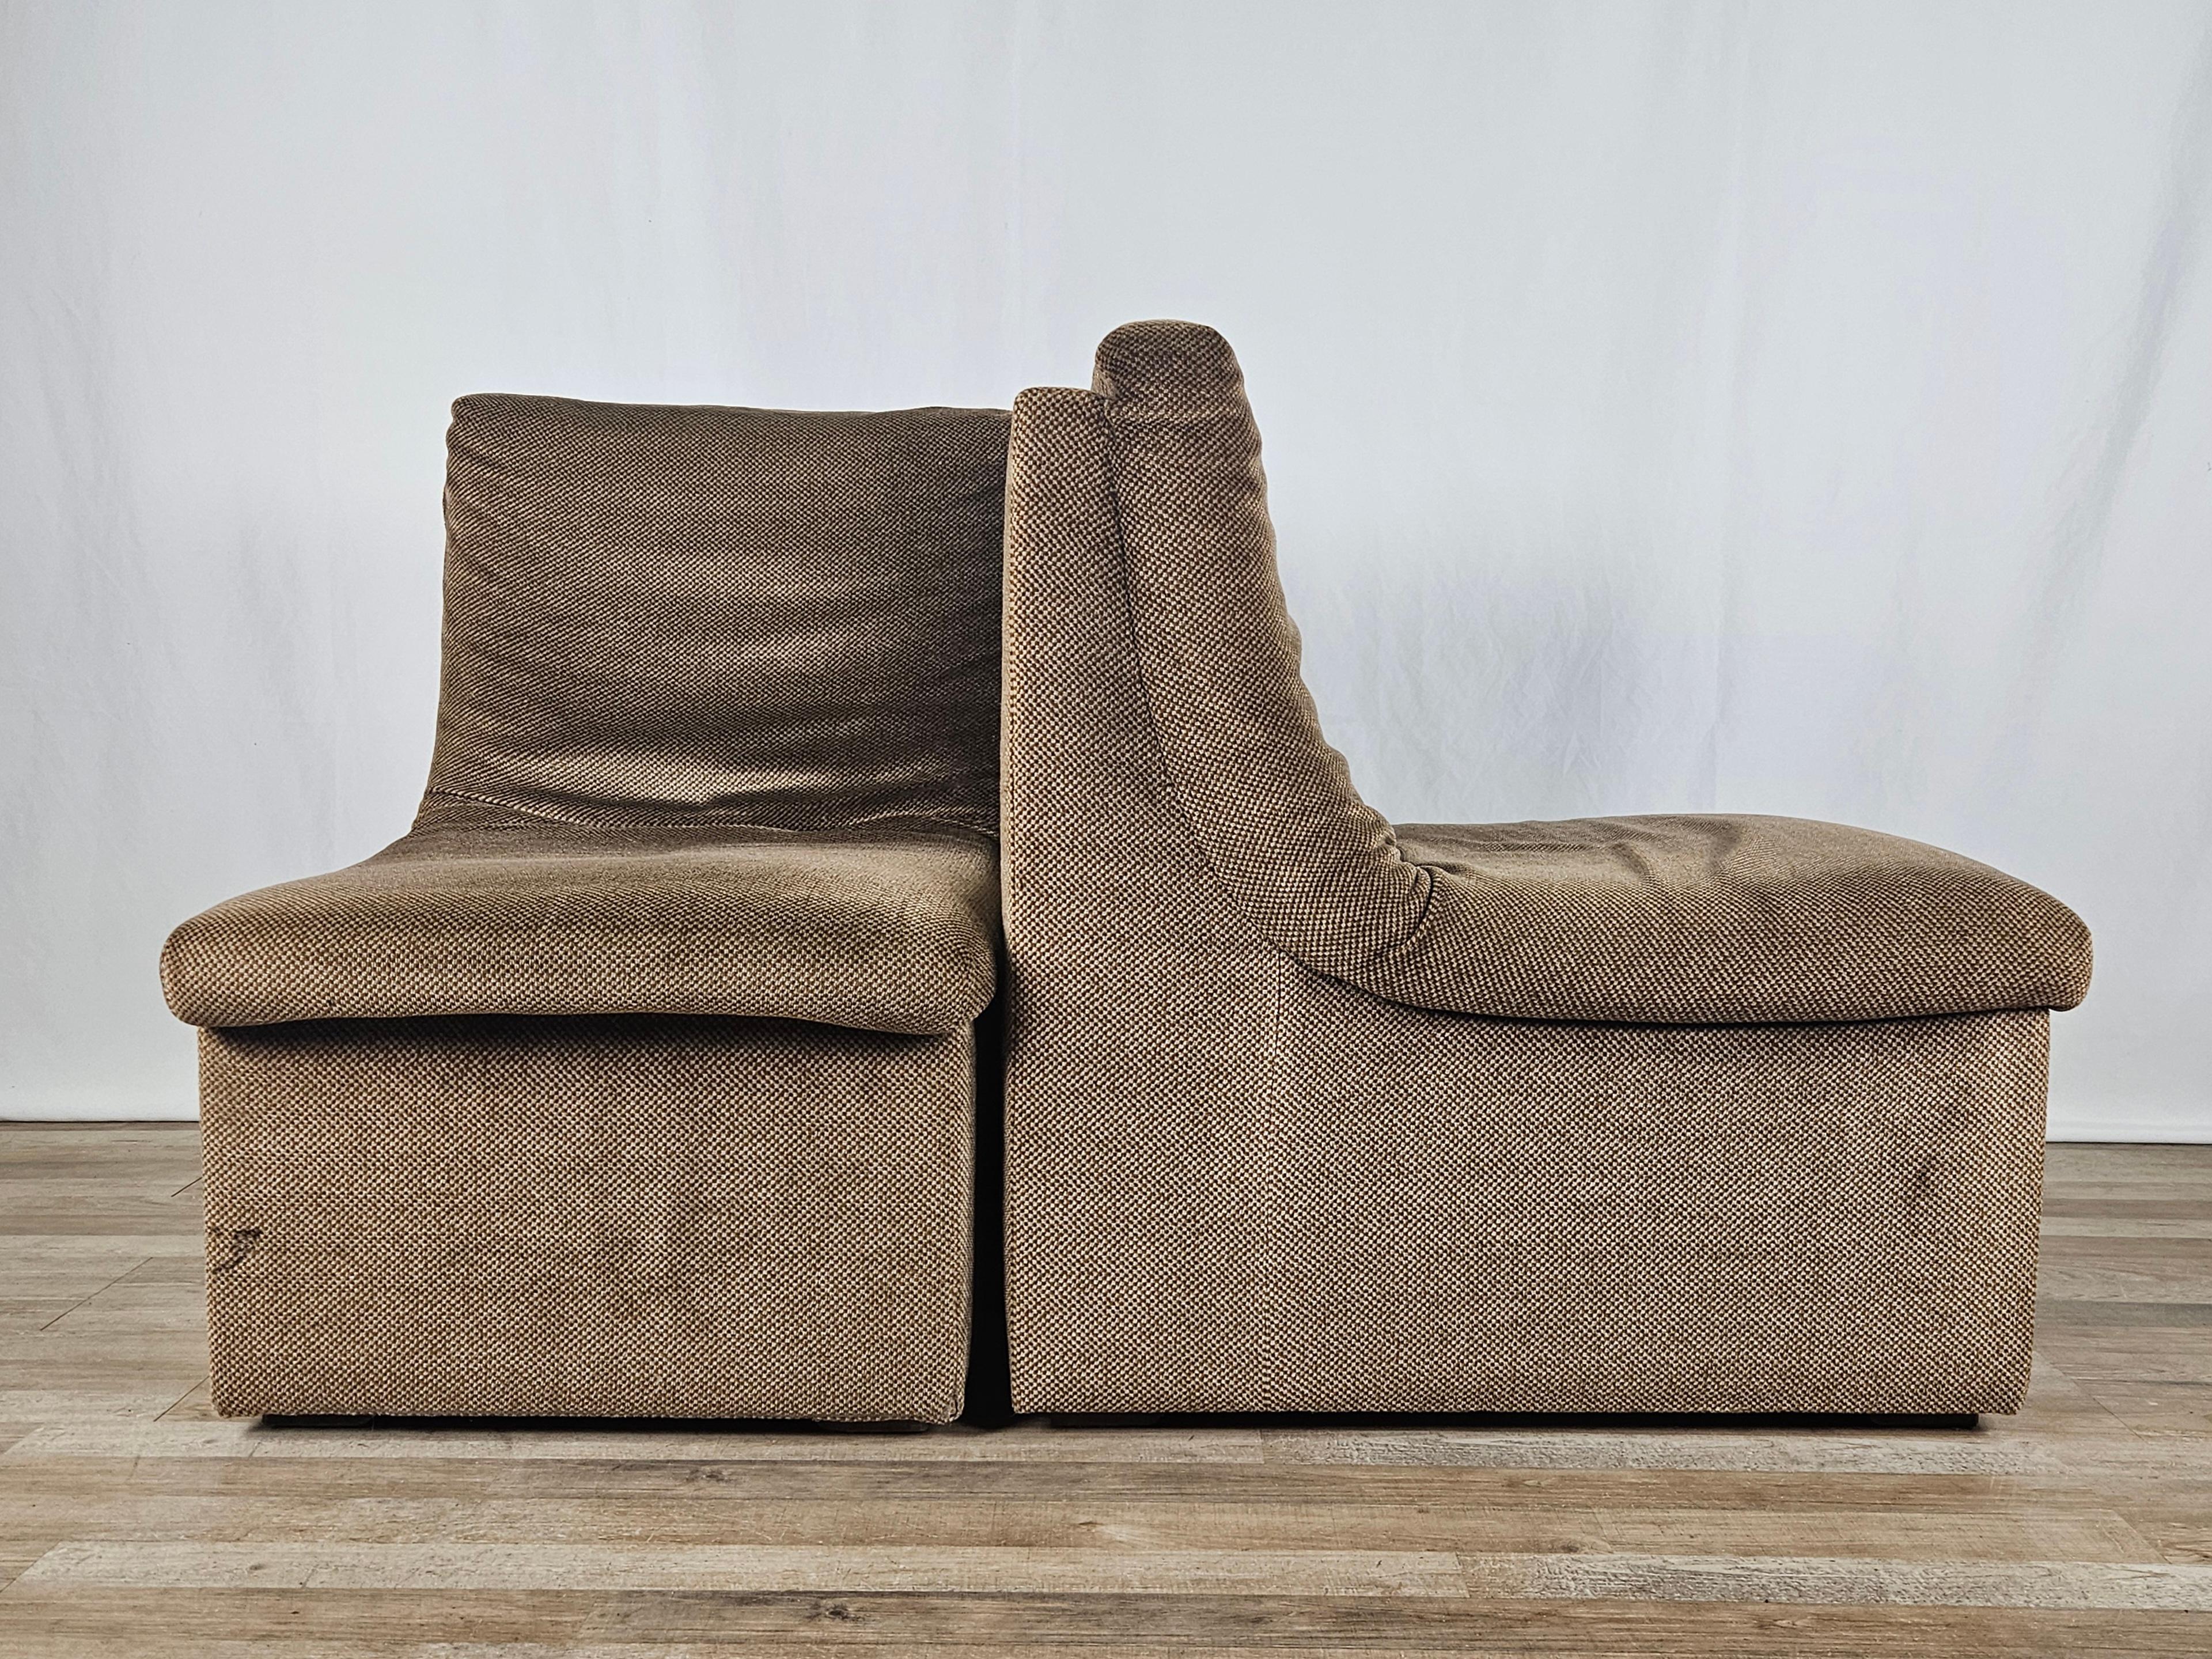 Set of five modular 1970s fabric seats In Good Condition For Sale In Premariacco, IT